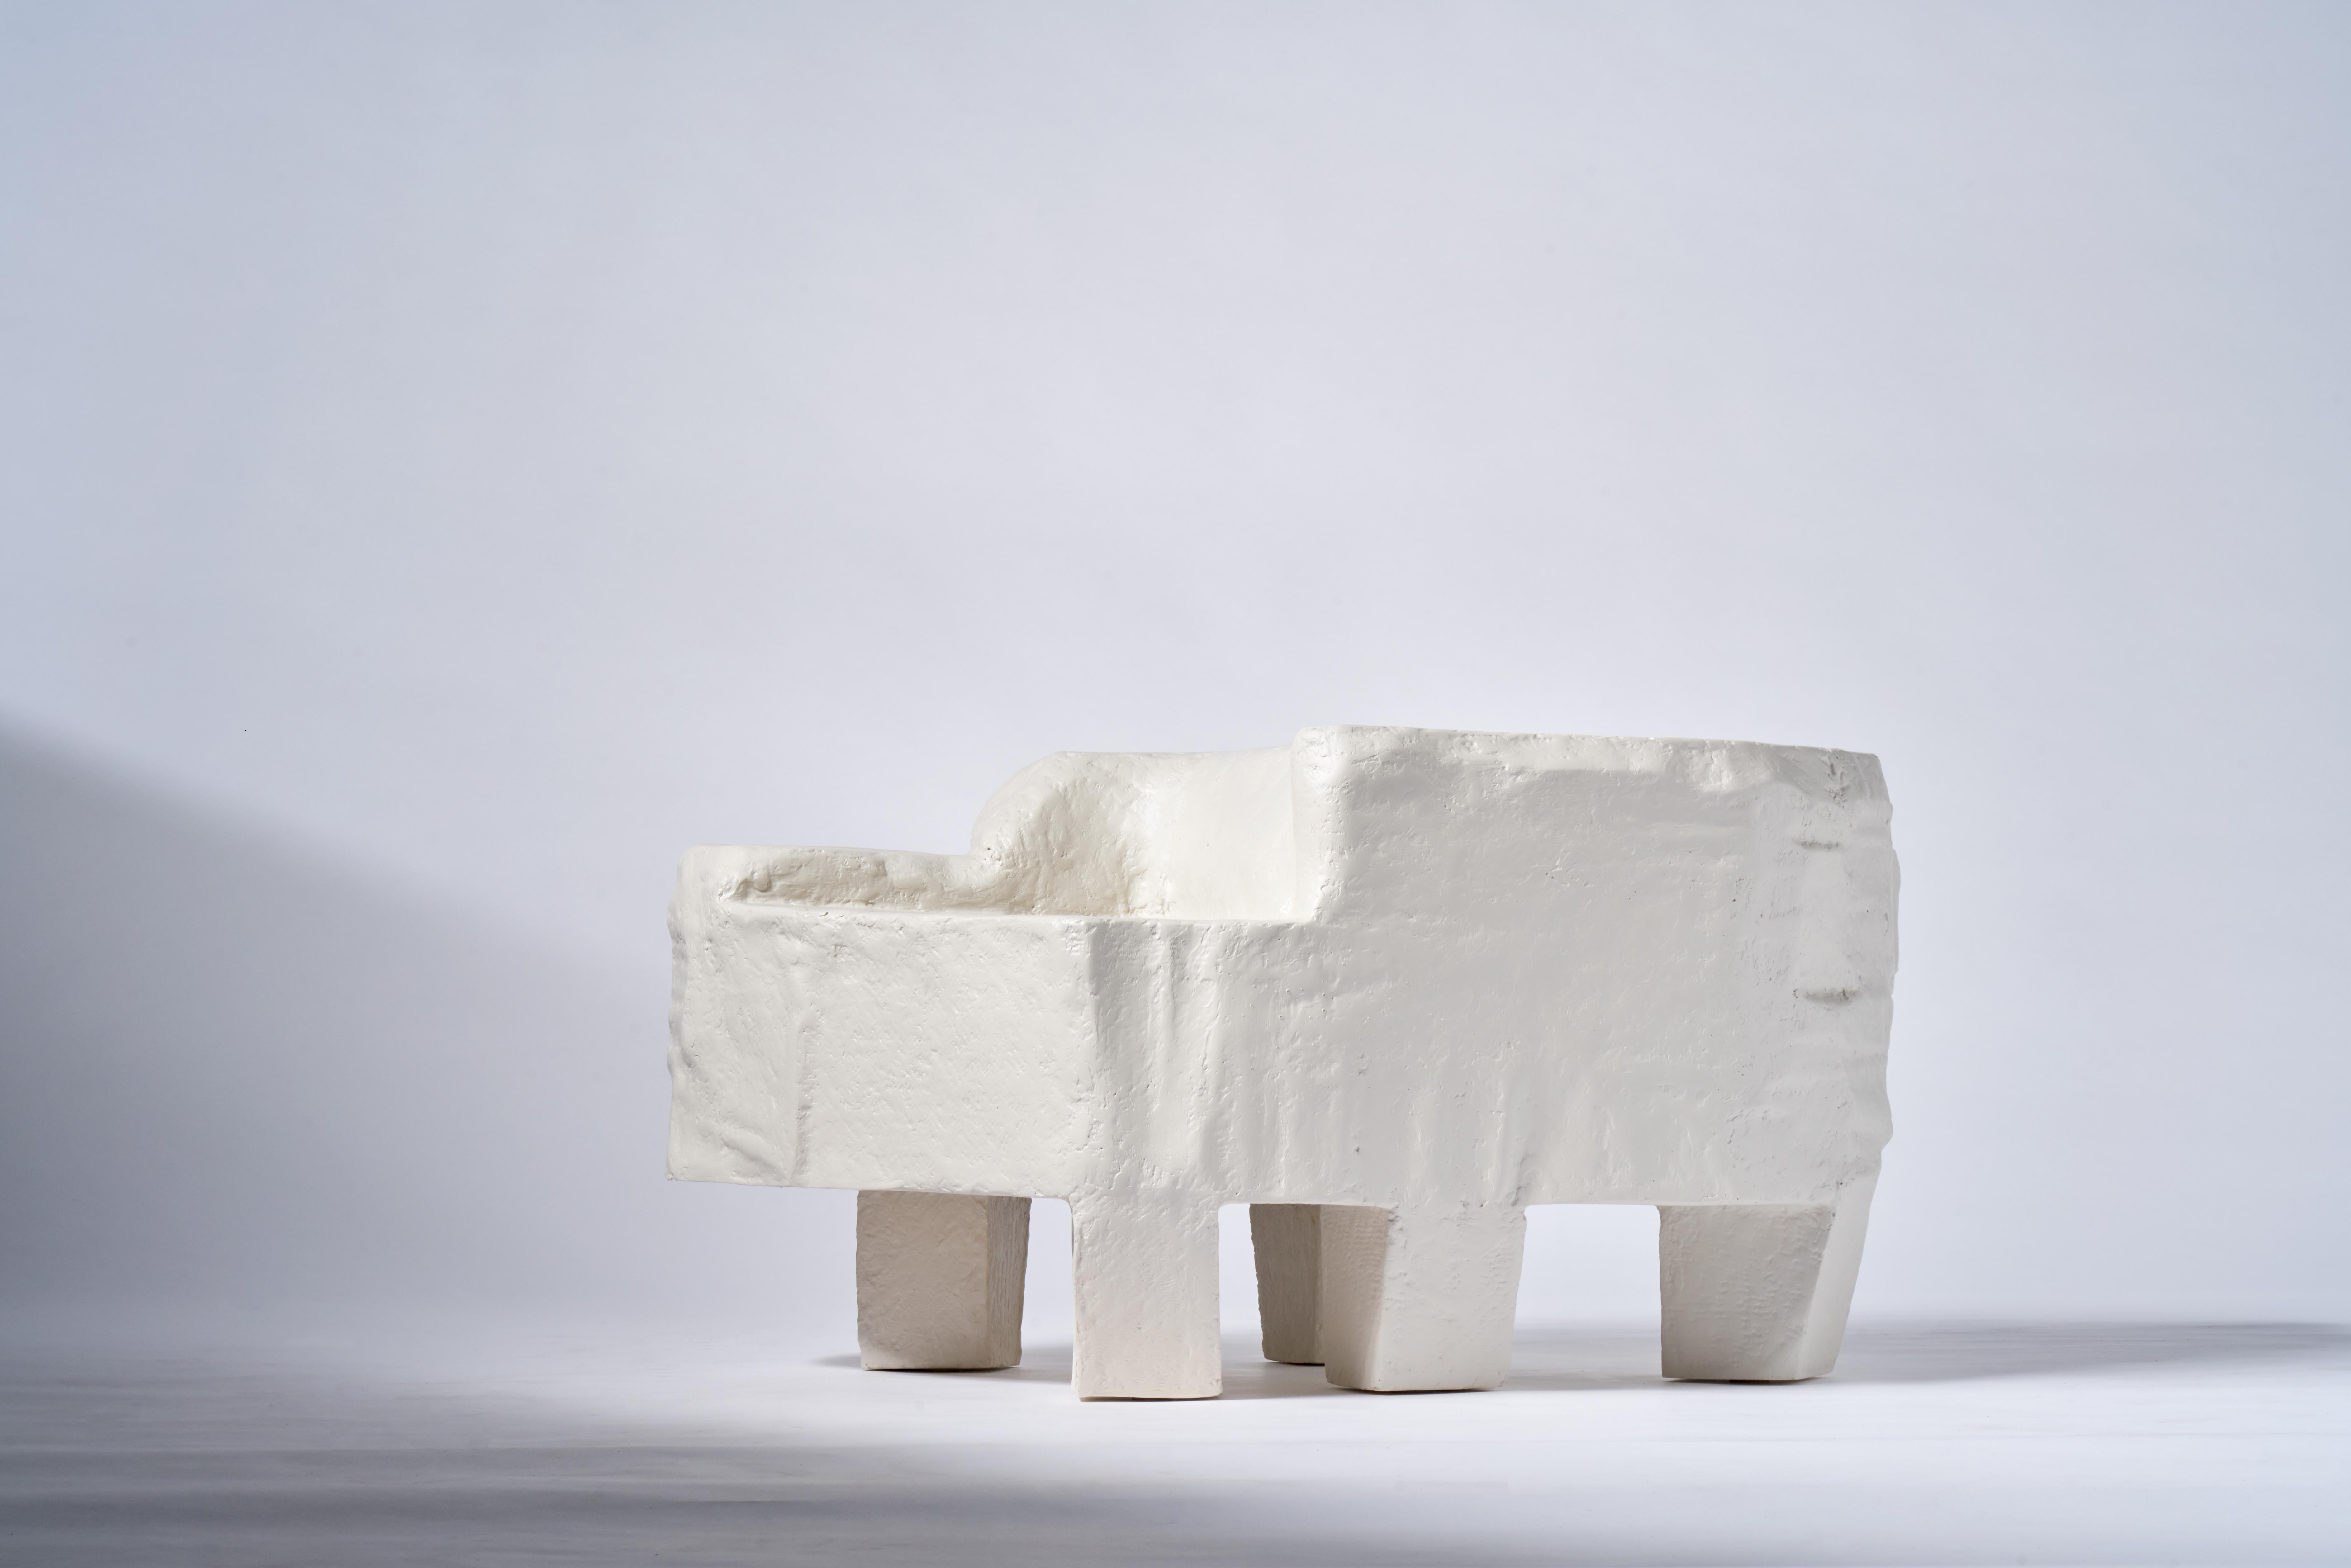 Heavy is a series of furniture that explores the relationship between form and material, blending the ideas of man made and nature. Inspired by ancient Dolmen structures and Brutalist architecture, the tables mimic the natural feel of the rocks used